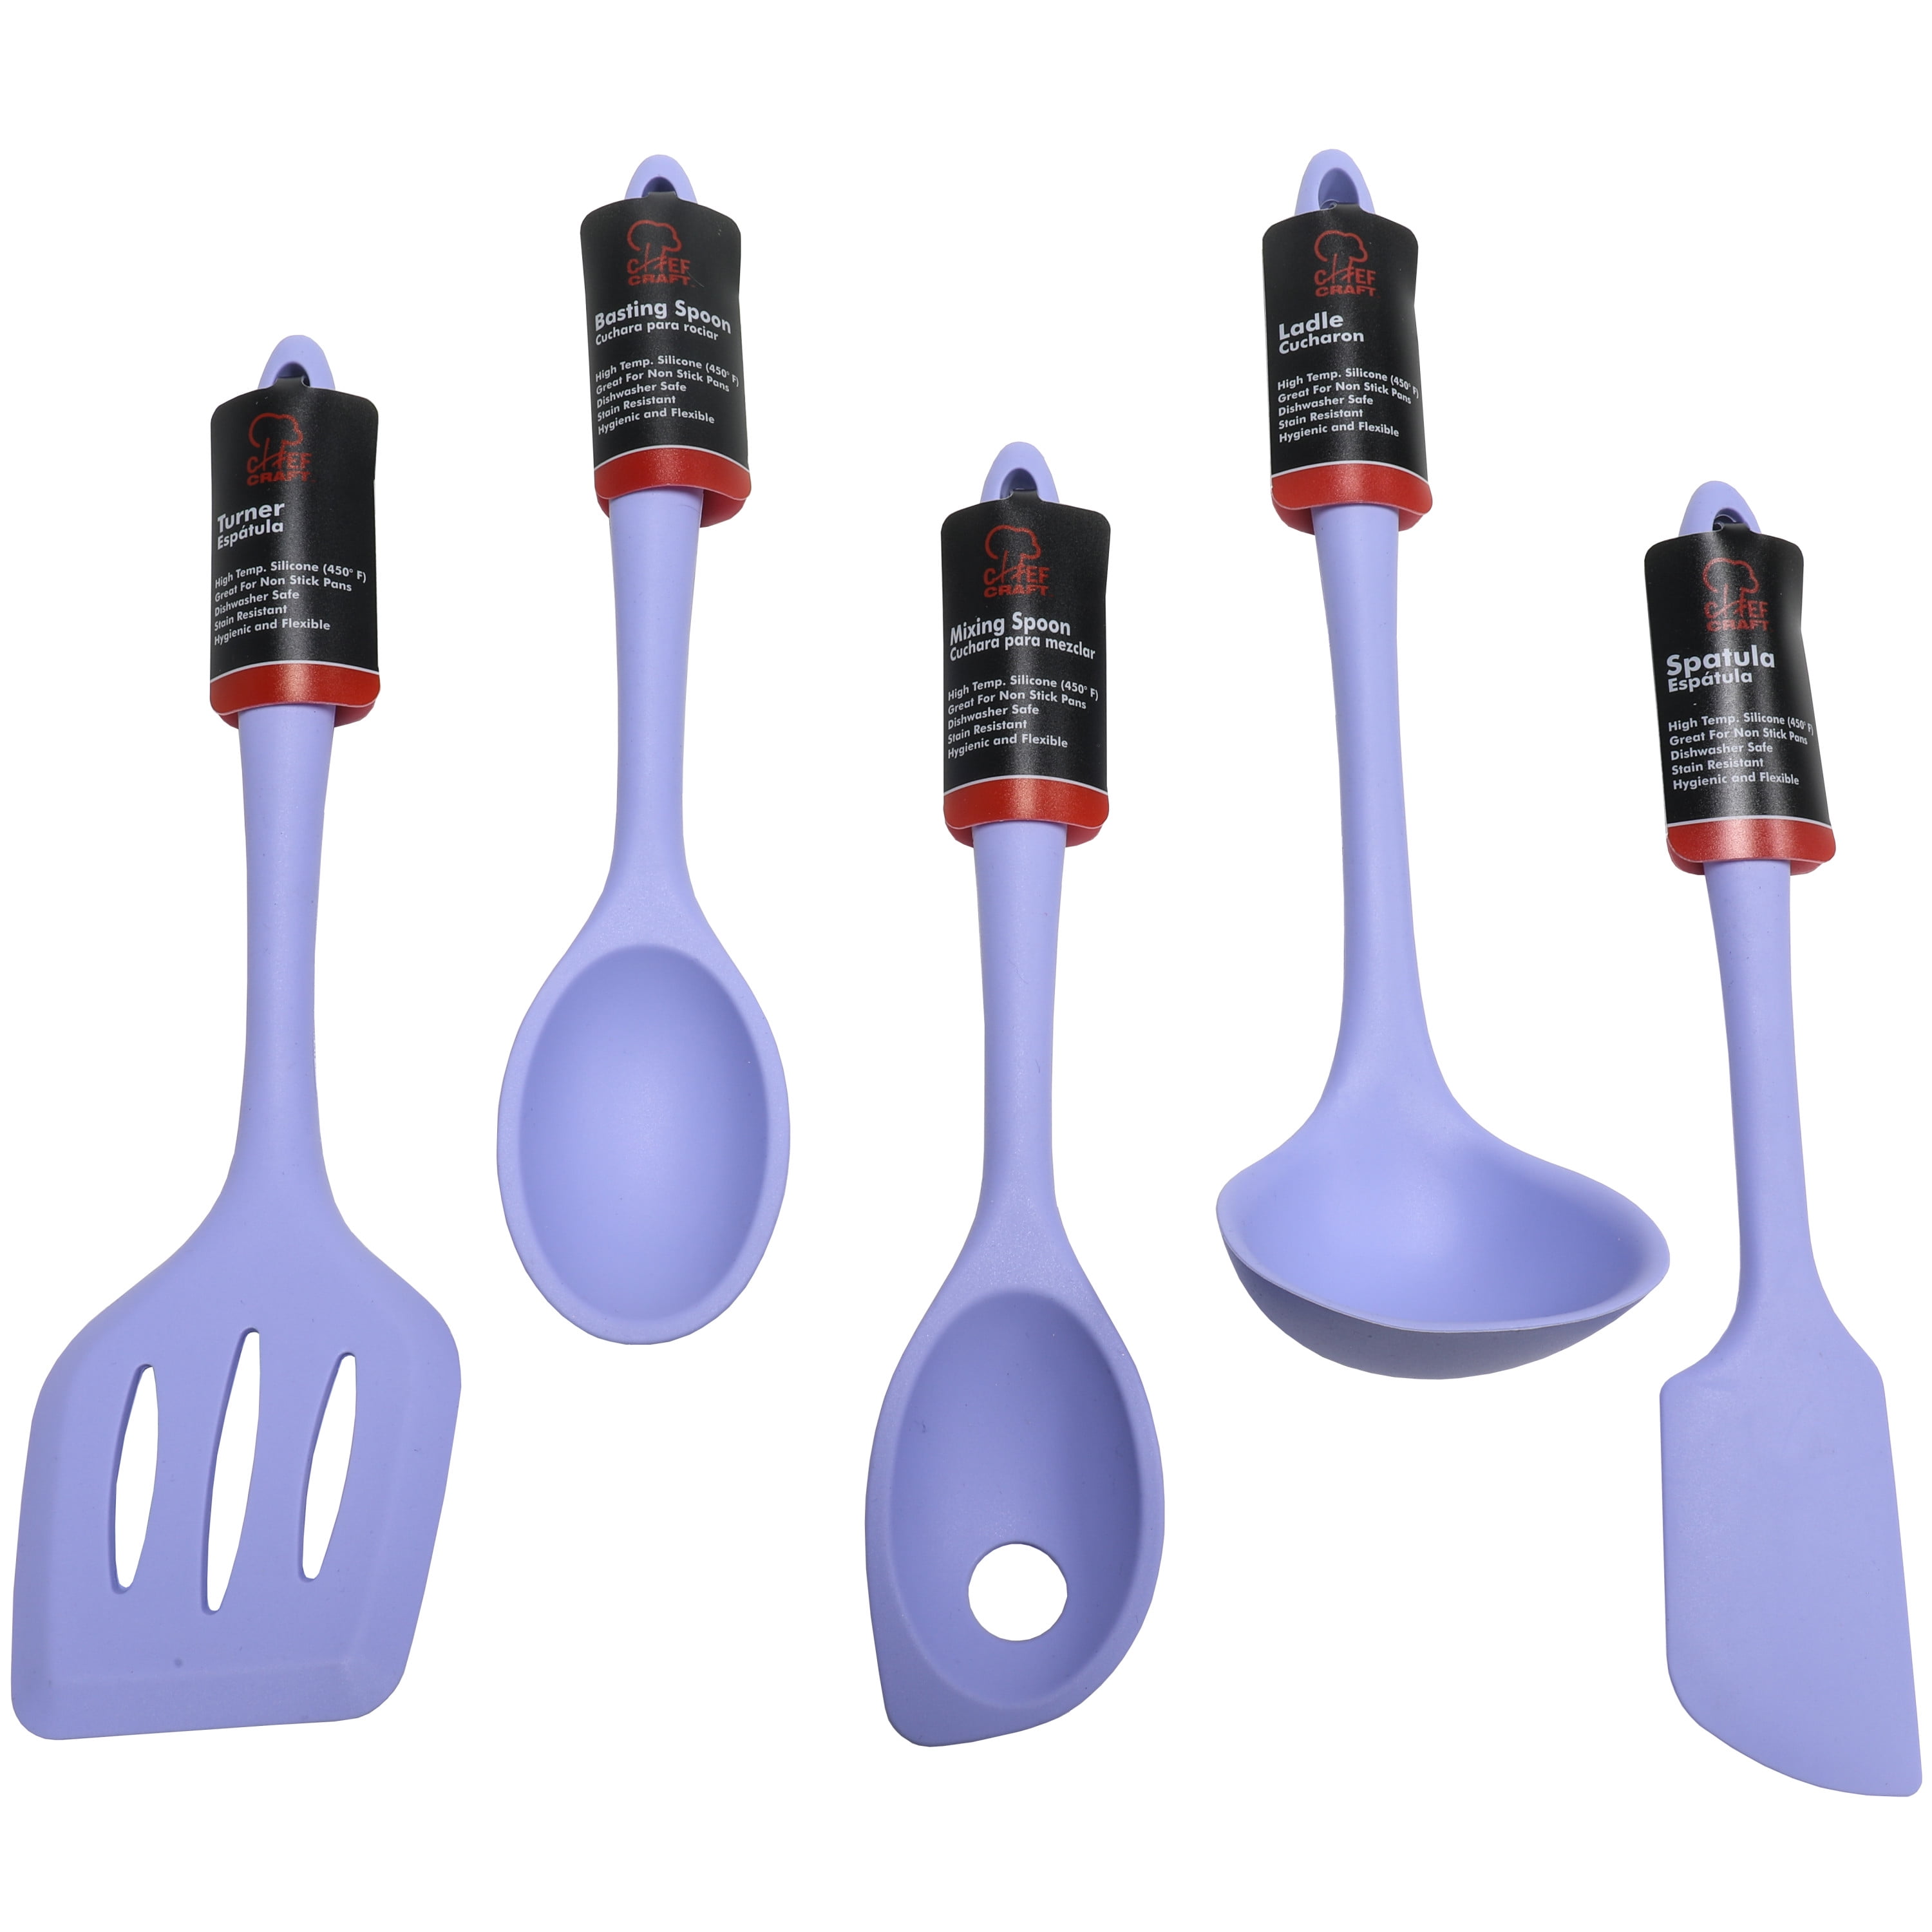 Kitchen Utensil Set of 6 Silicone Spoon Cook Tools Temp 446℉ Dishwasher Safe